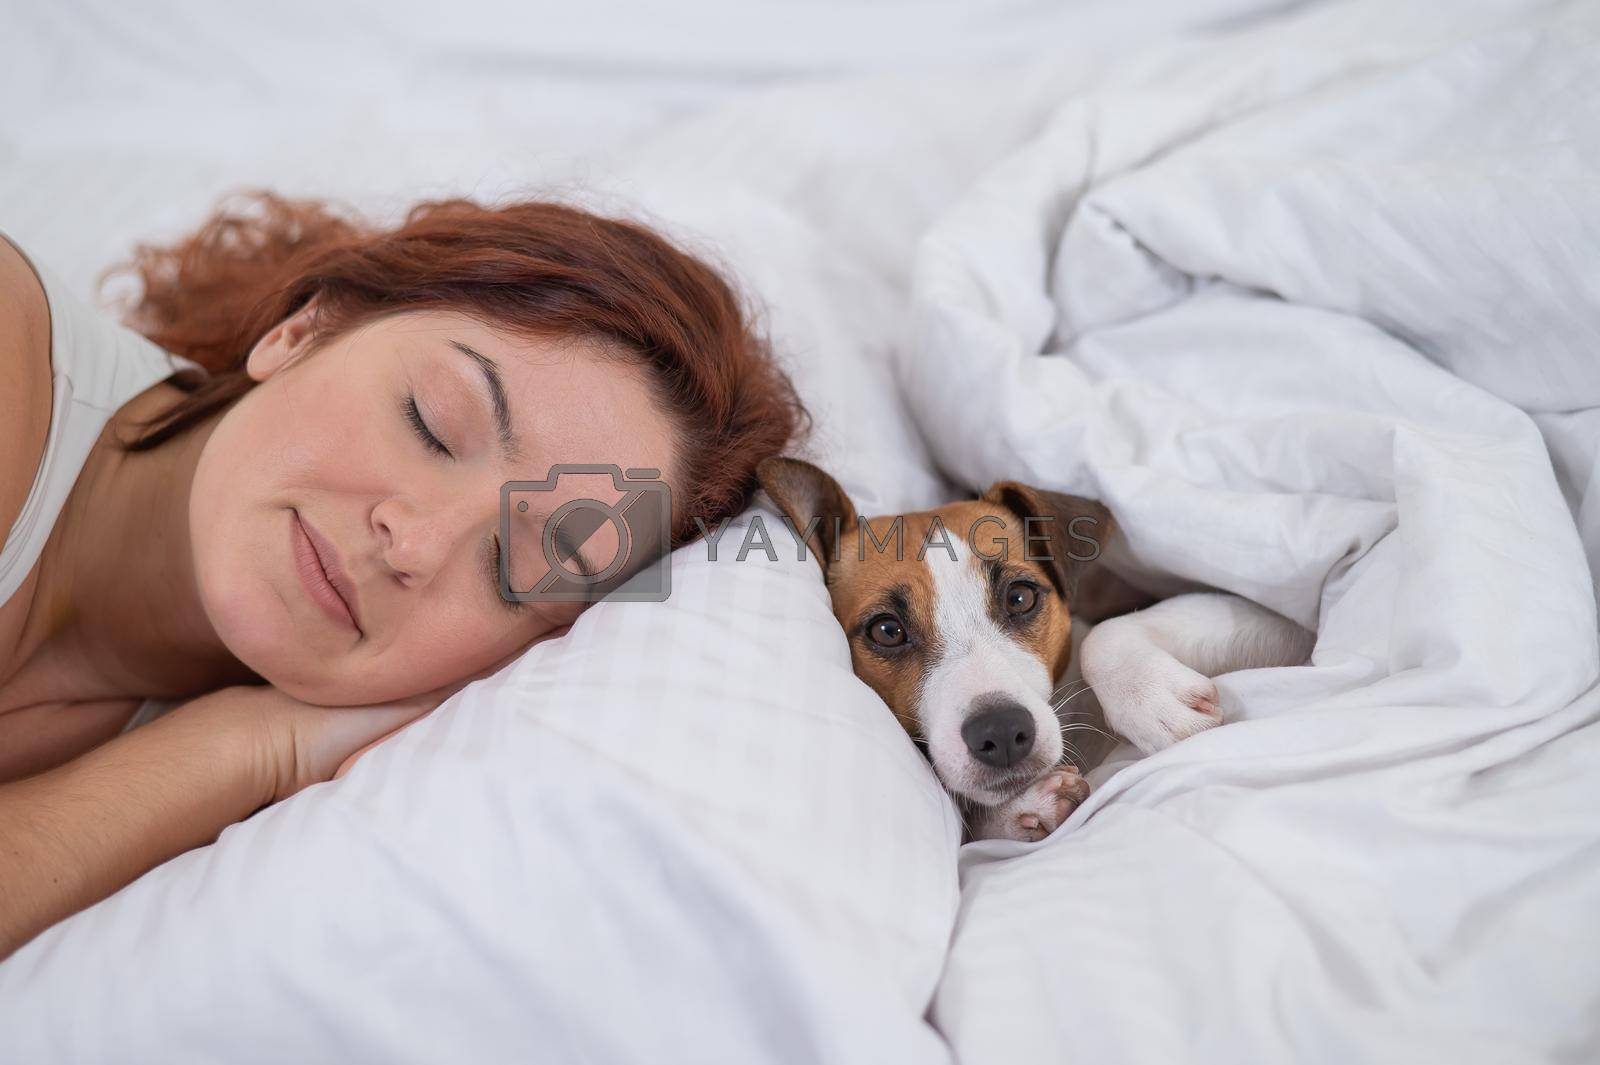 Royalty free image of Jack Russell Terrier dog lies with the owner in bed. by mrwed54